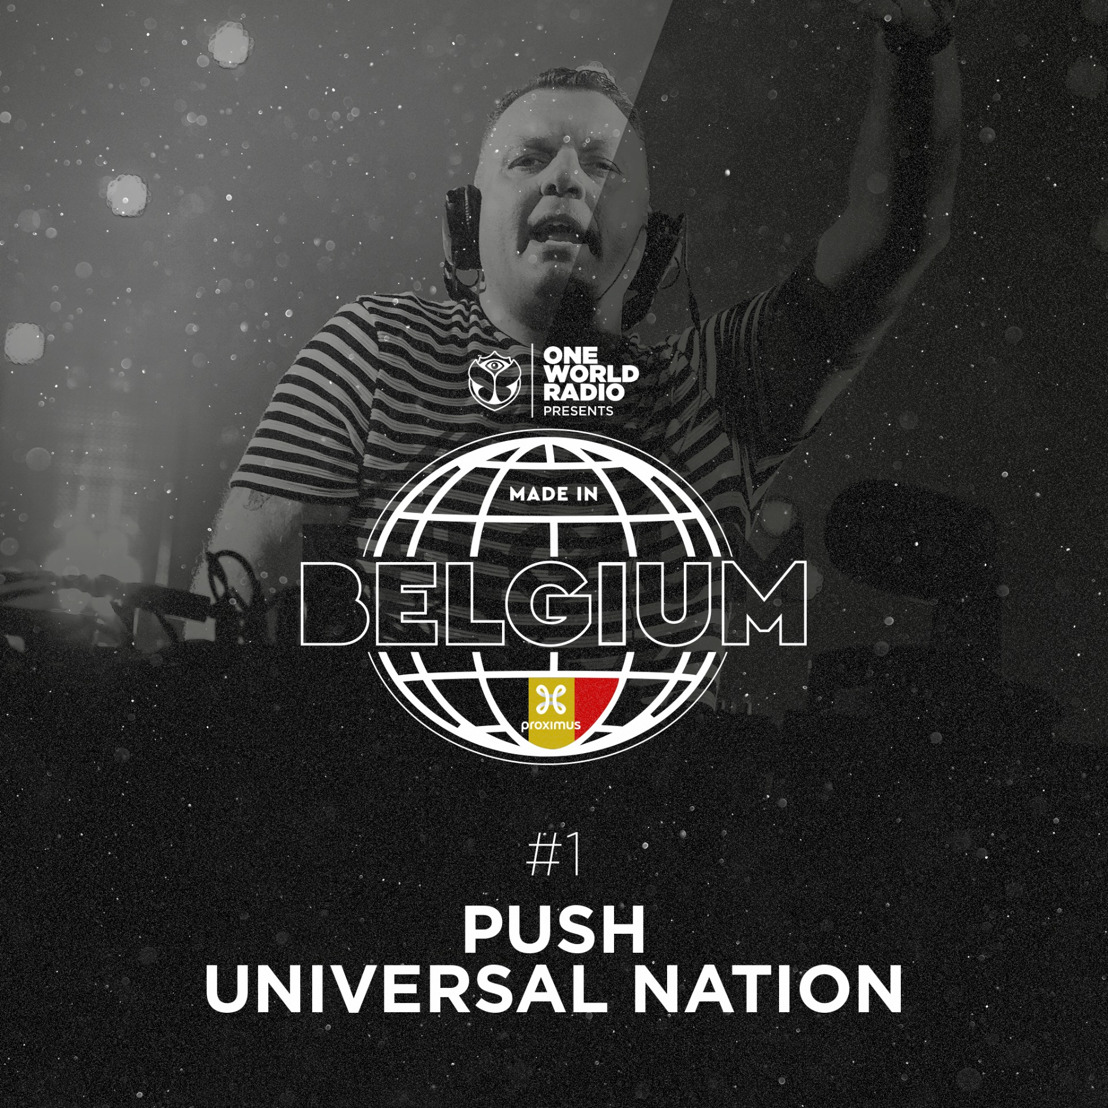 'Universal Nation’ by Push becomes the number 1 in The Made in Belgium Top 100